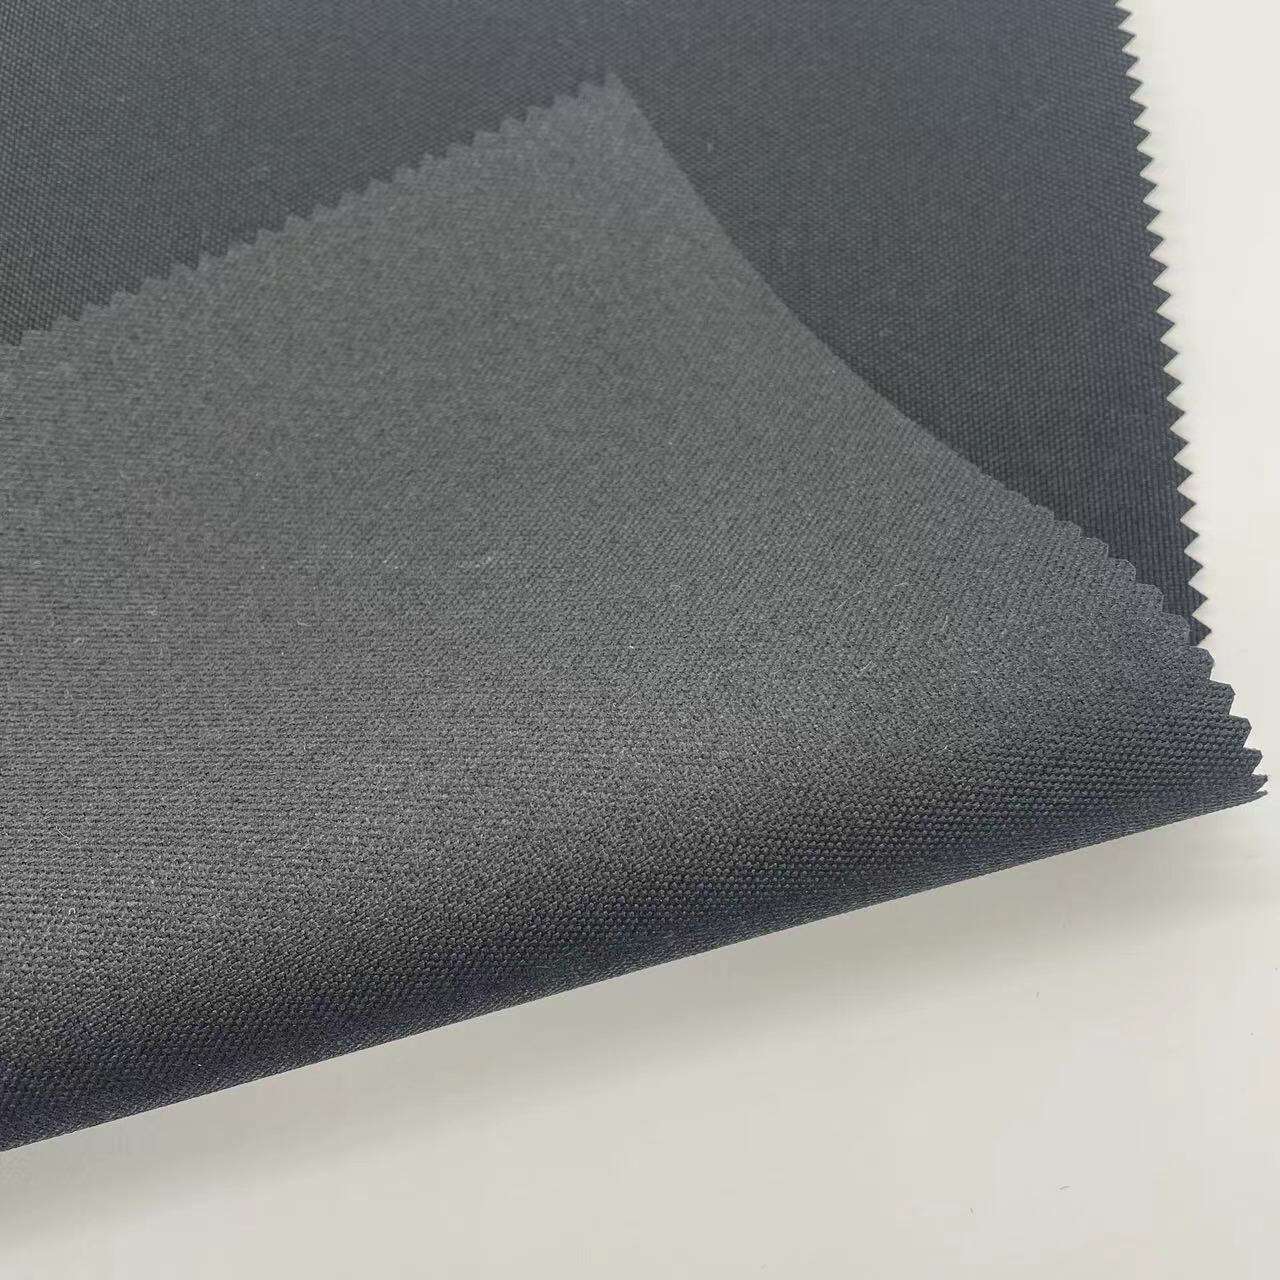 600D PU coated Polyester oxford fabric with durable water repellent